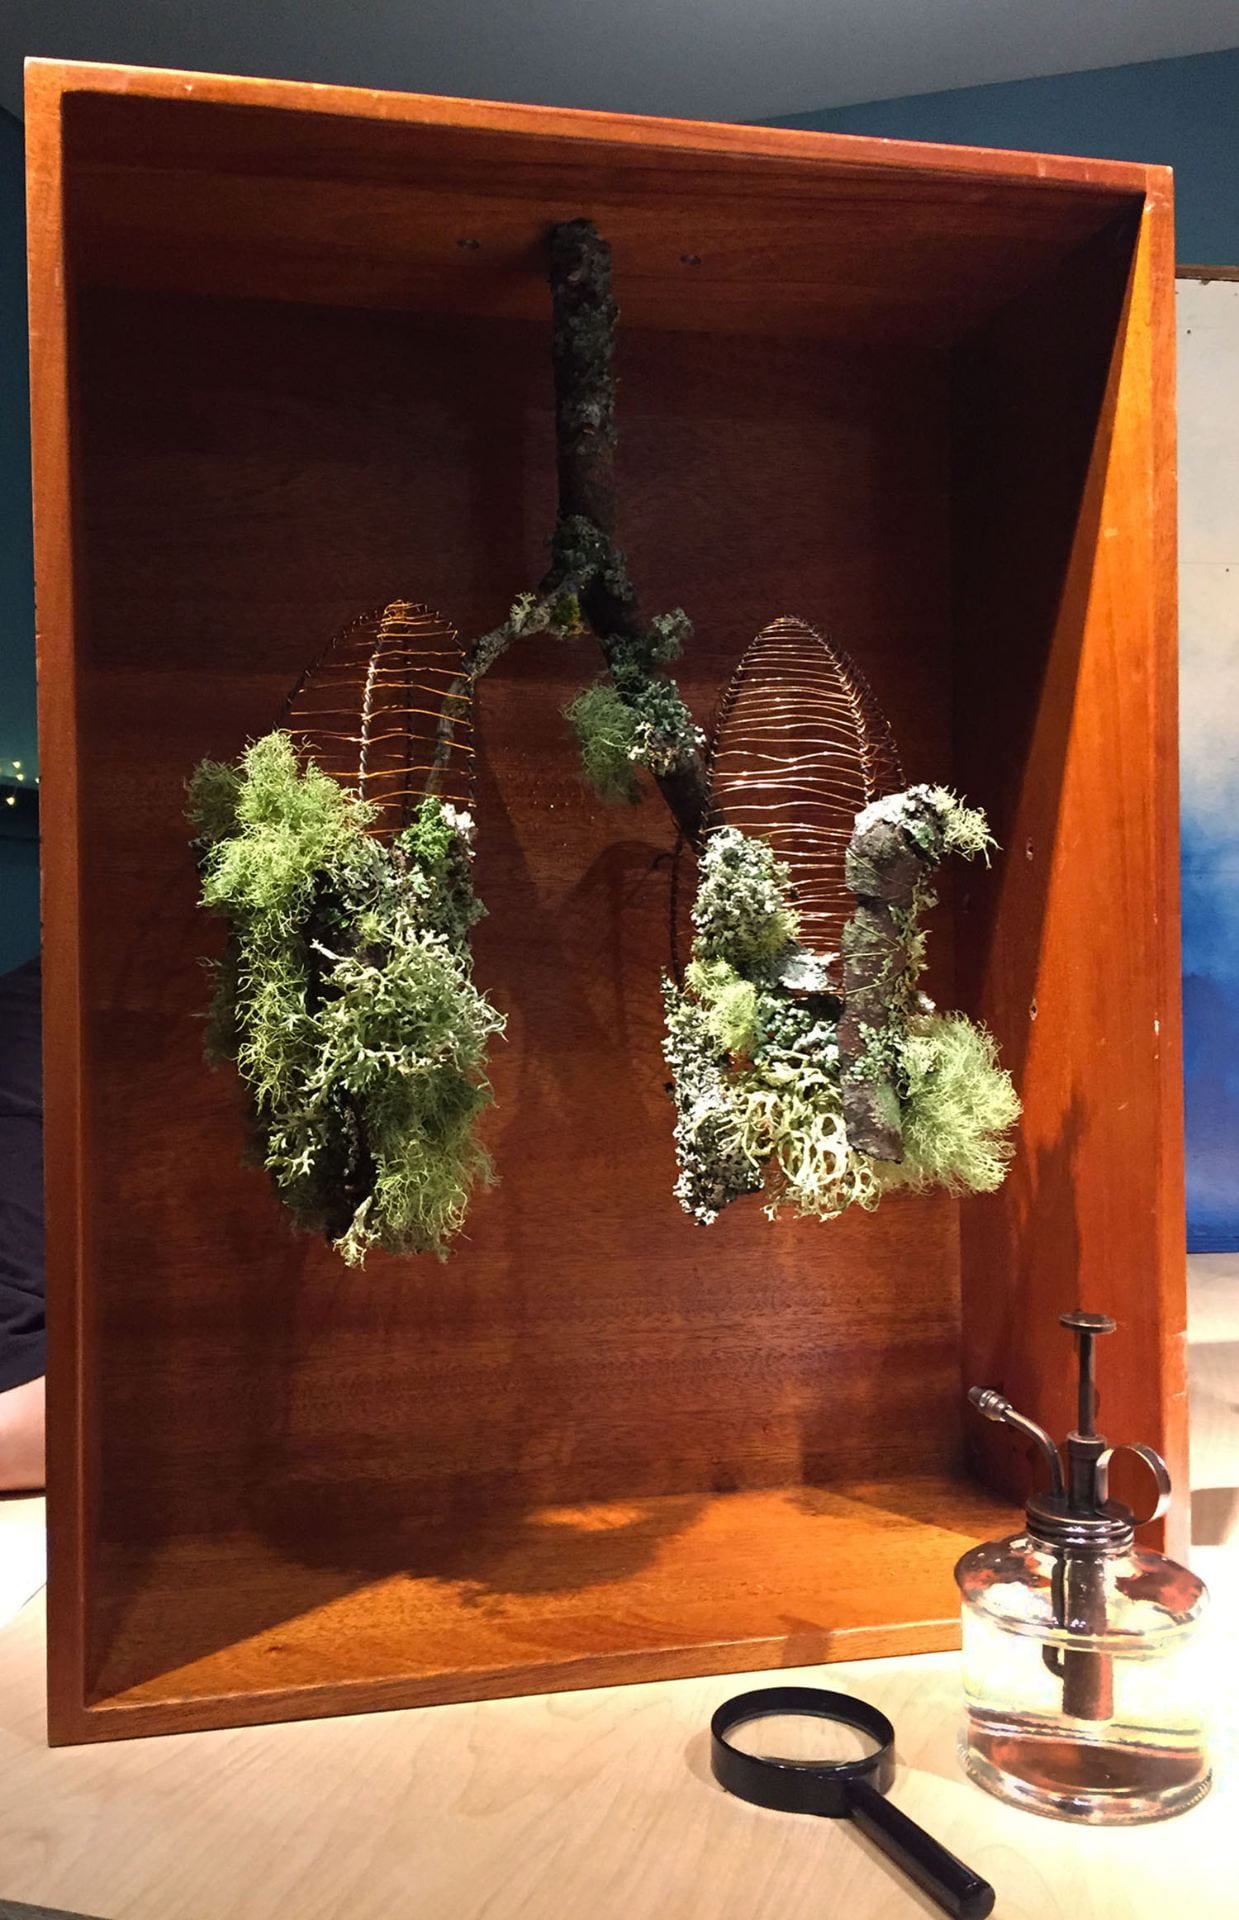 mossy, lichen covered branches and twigs crafted in the shape of lungs, mounted in a wood box